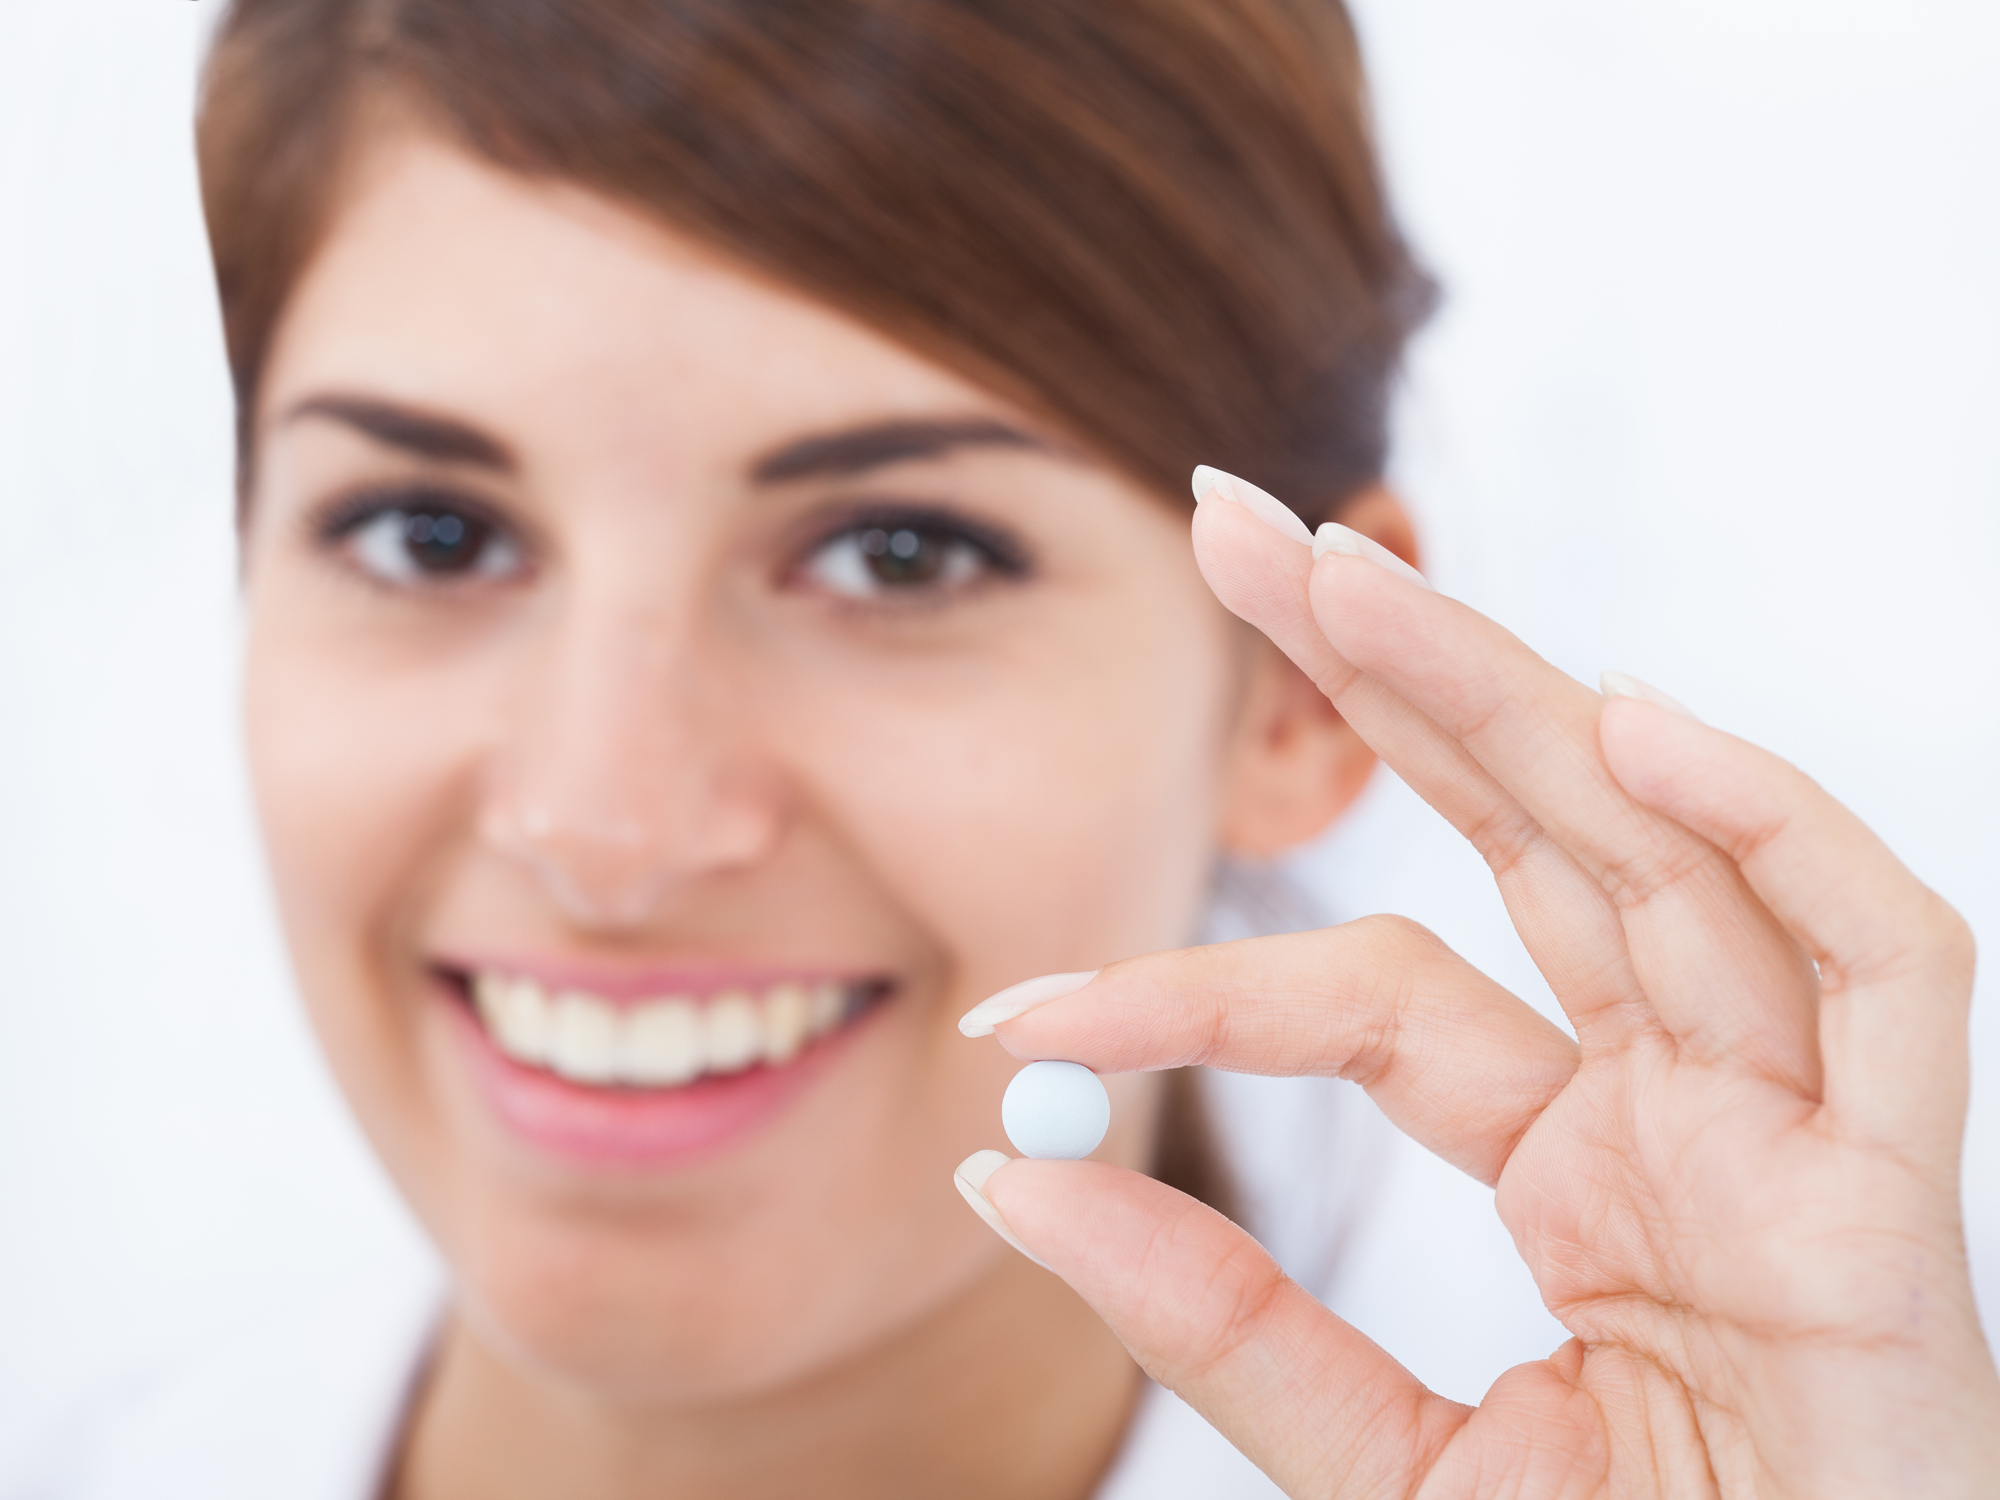 Dodge breast cancer with this probiotic pill - Easy Health Options®